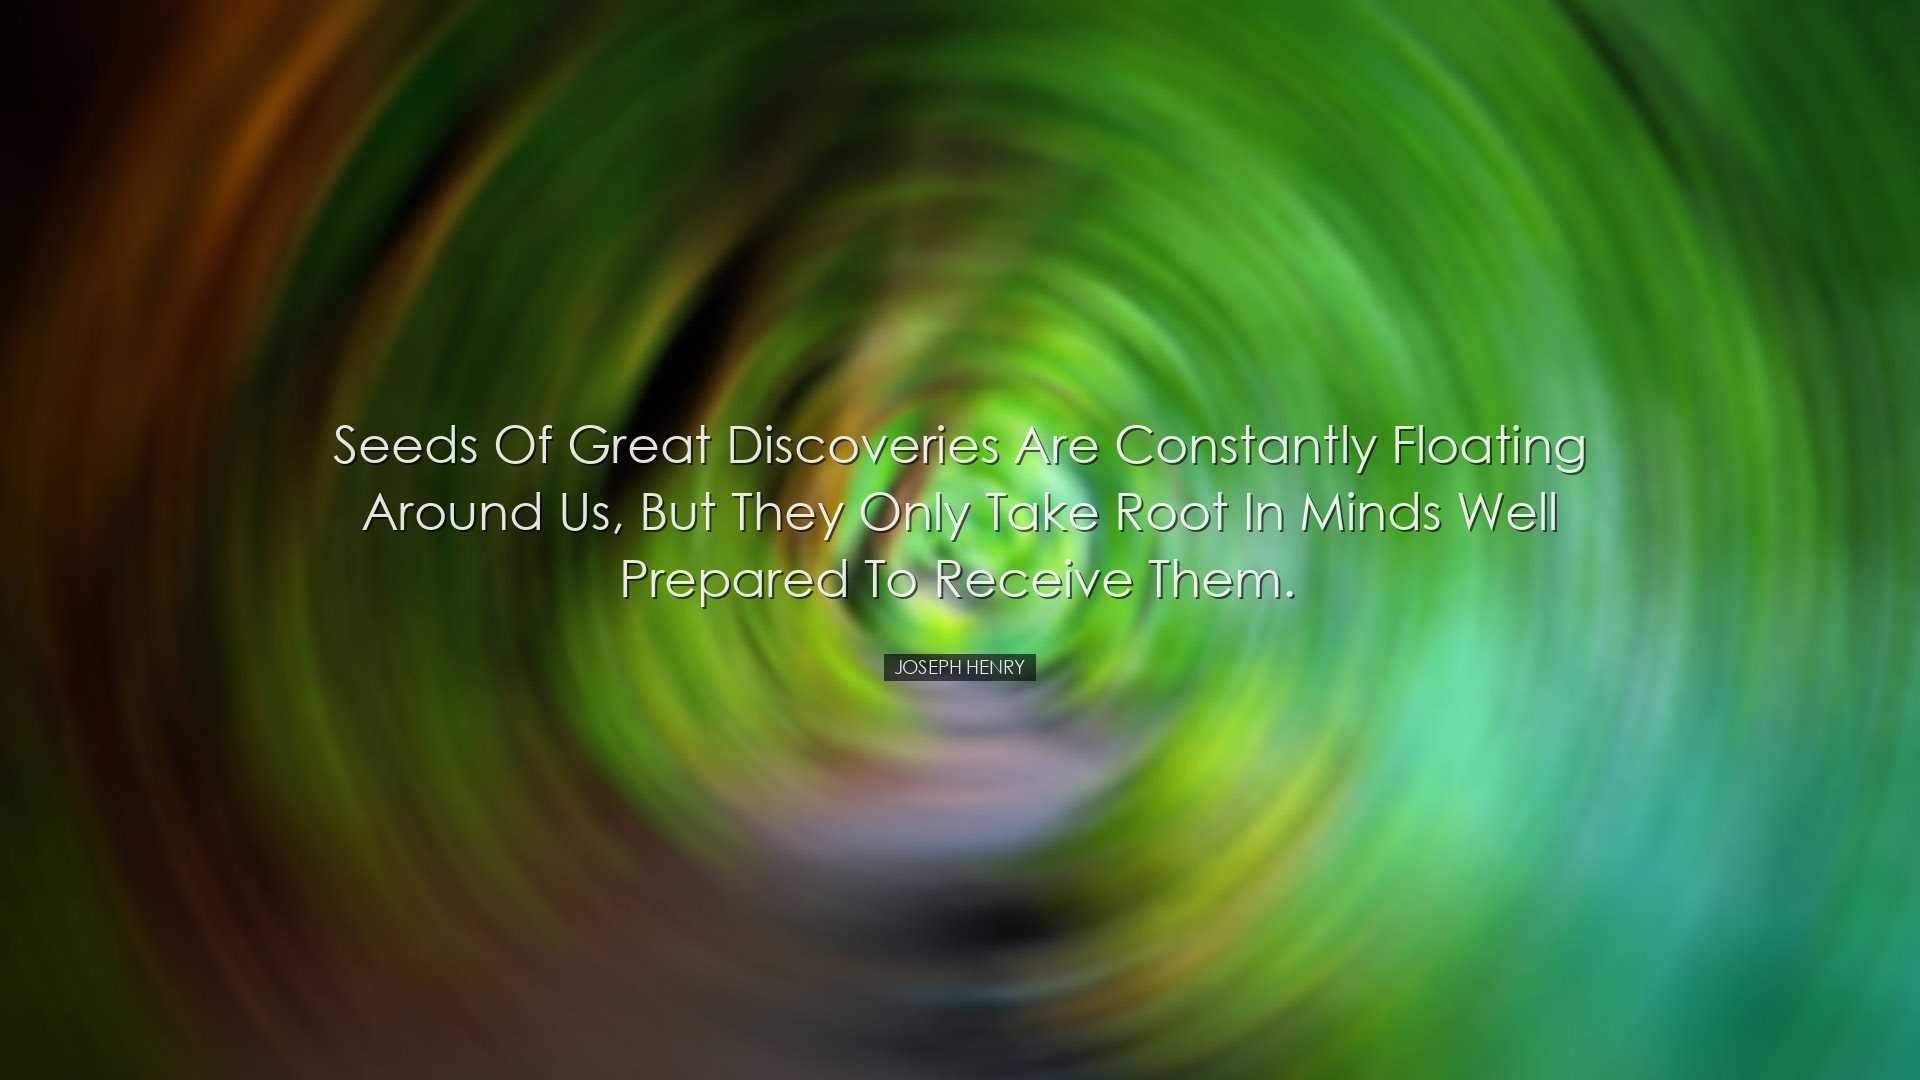 Seeds of great discoveries are constantly floating around us, but